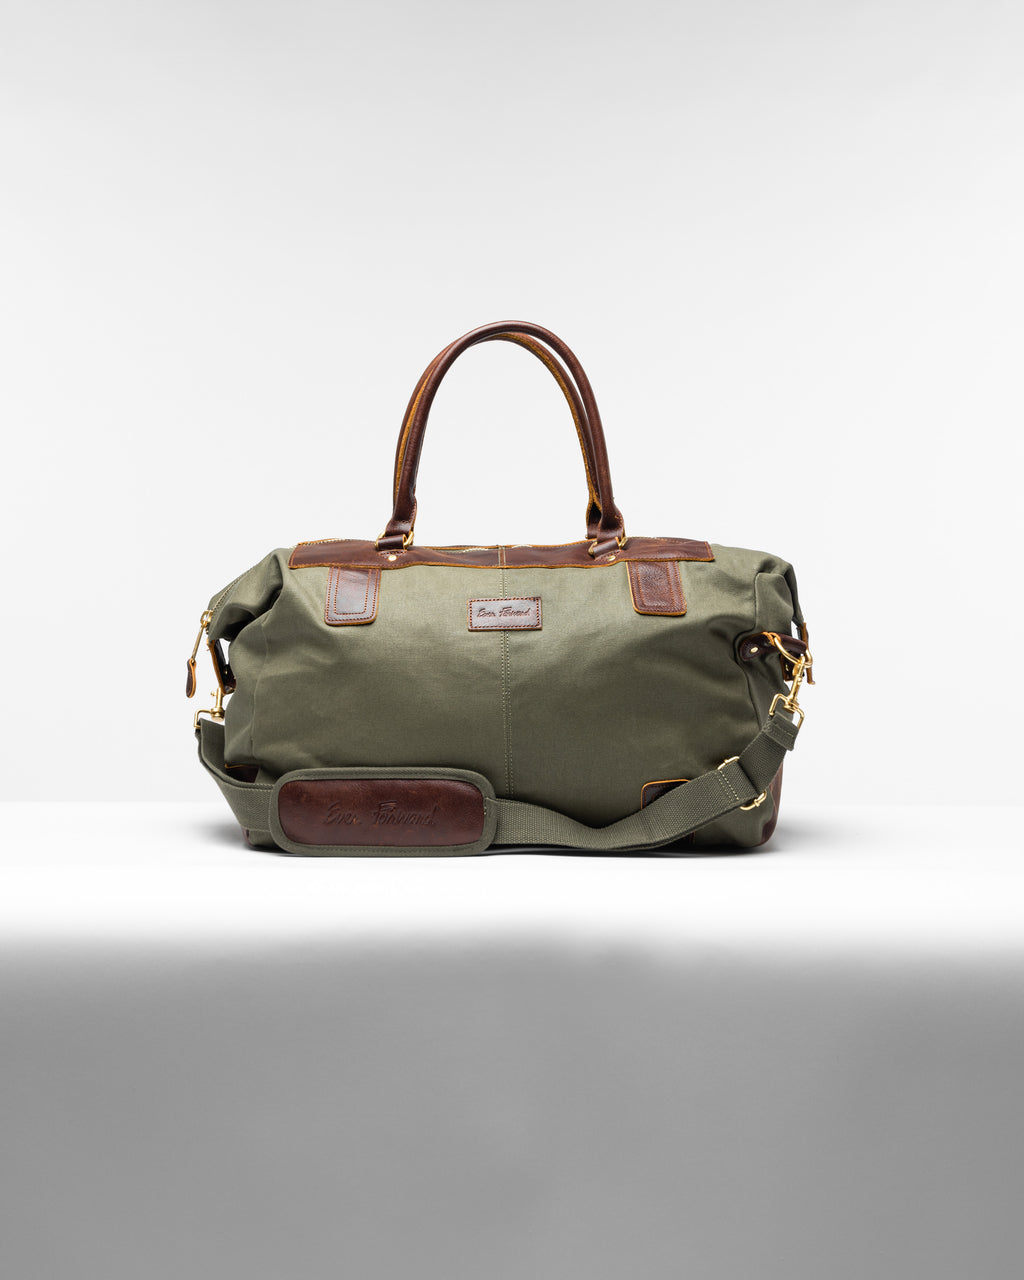 The Forever Duffel ~ Olive